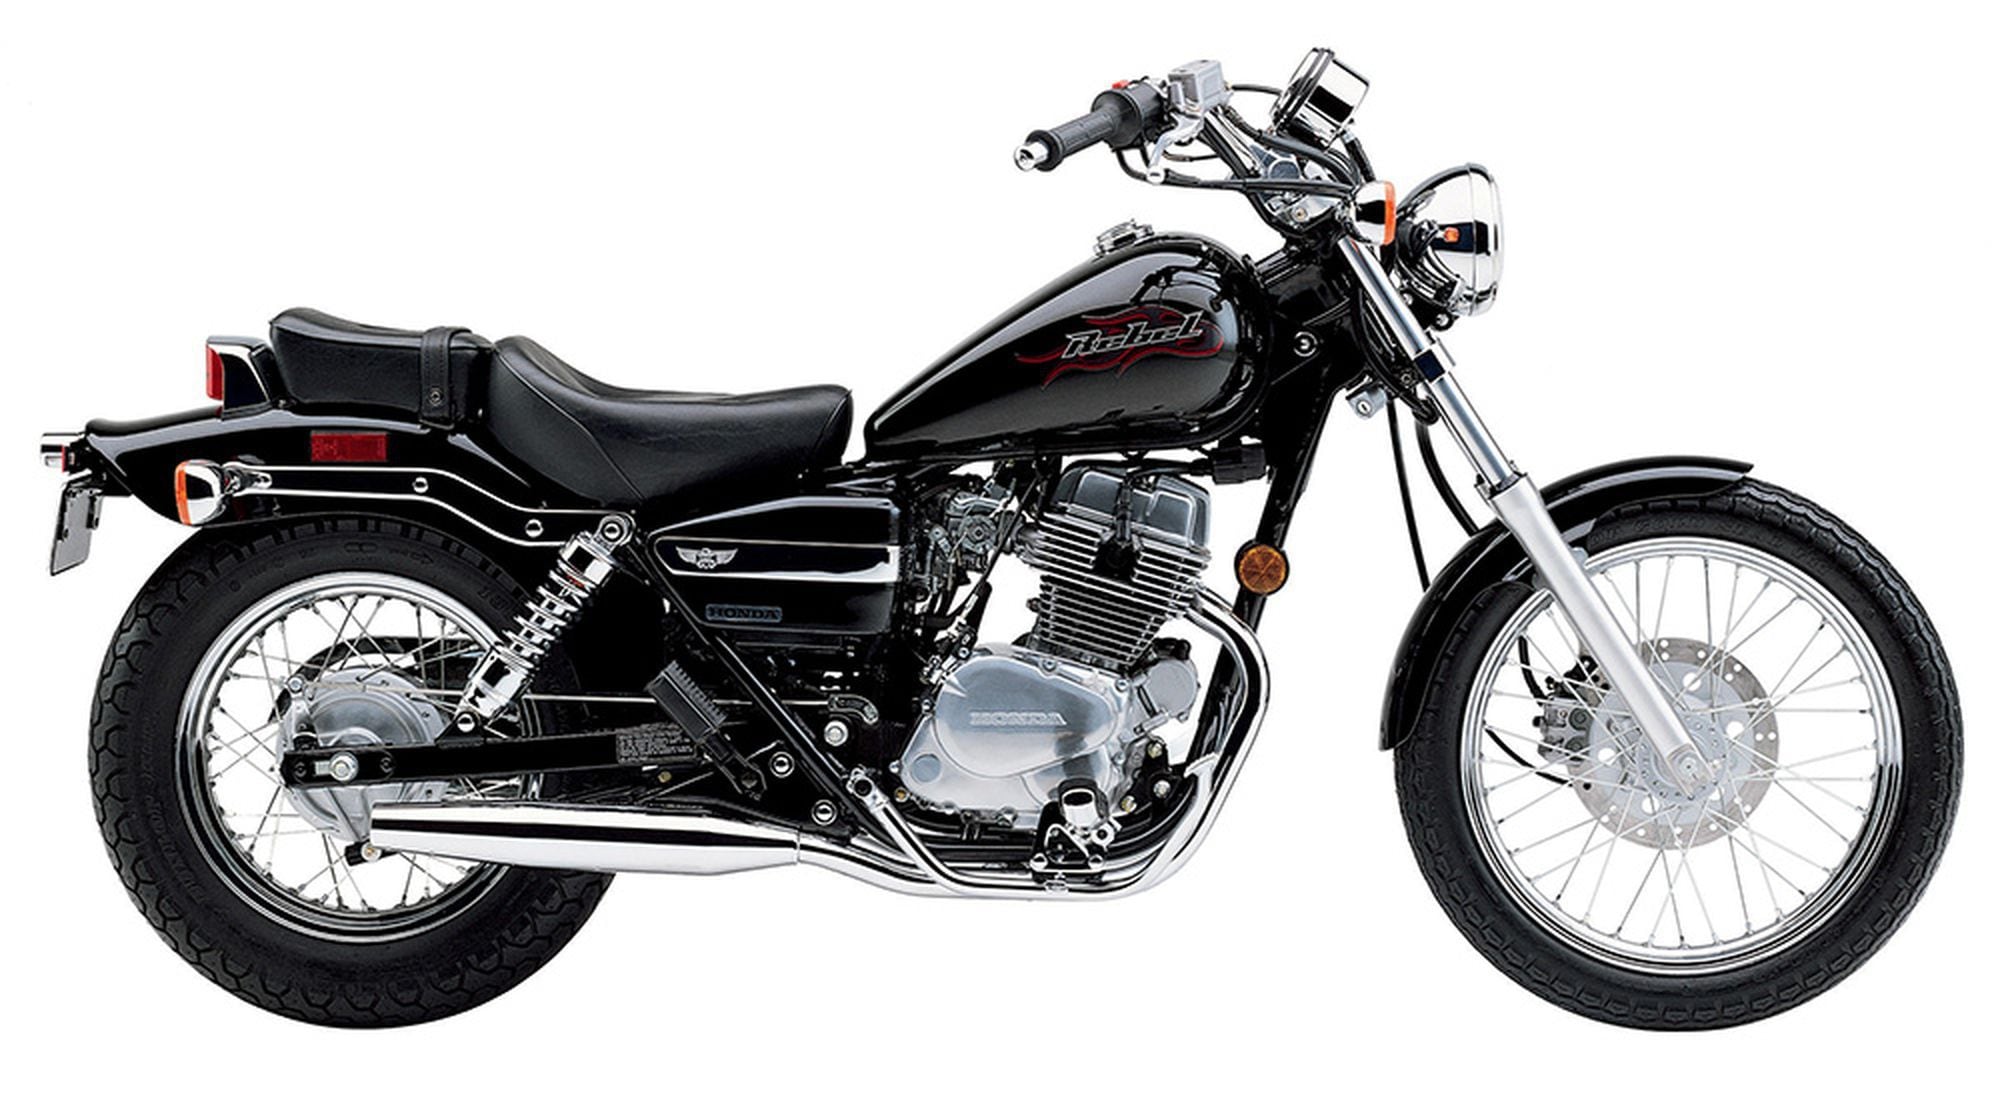 Right now you can pick up a Honda Rebel for a song in cities across the USA.